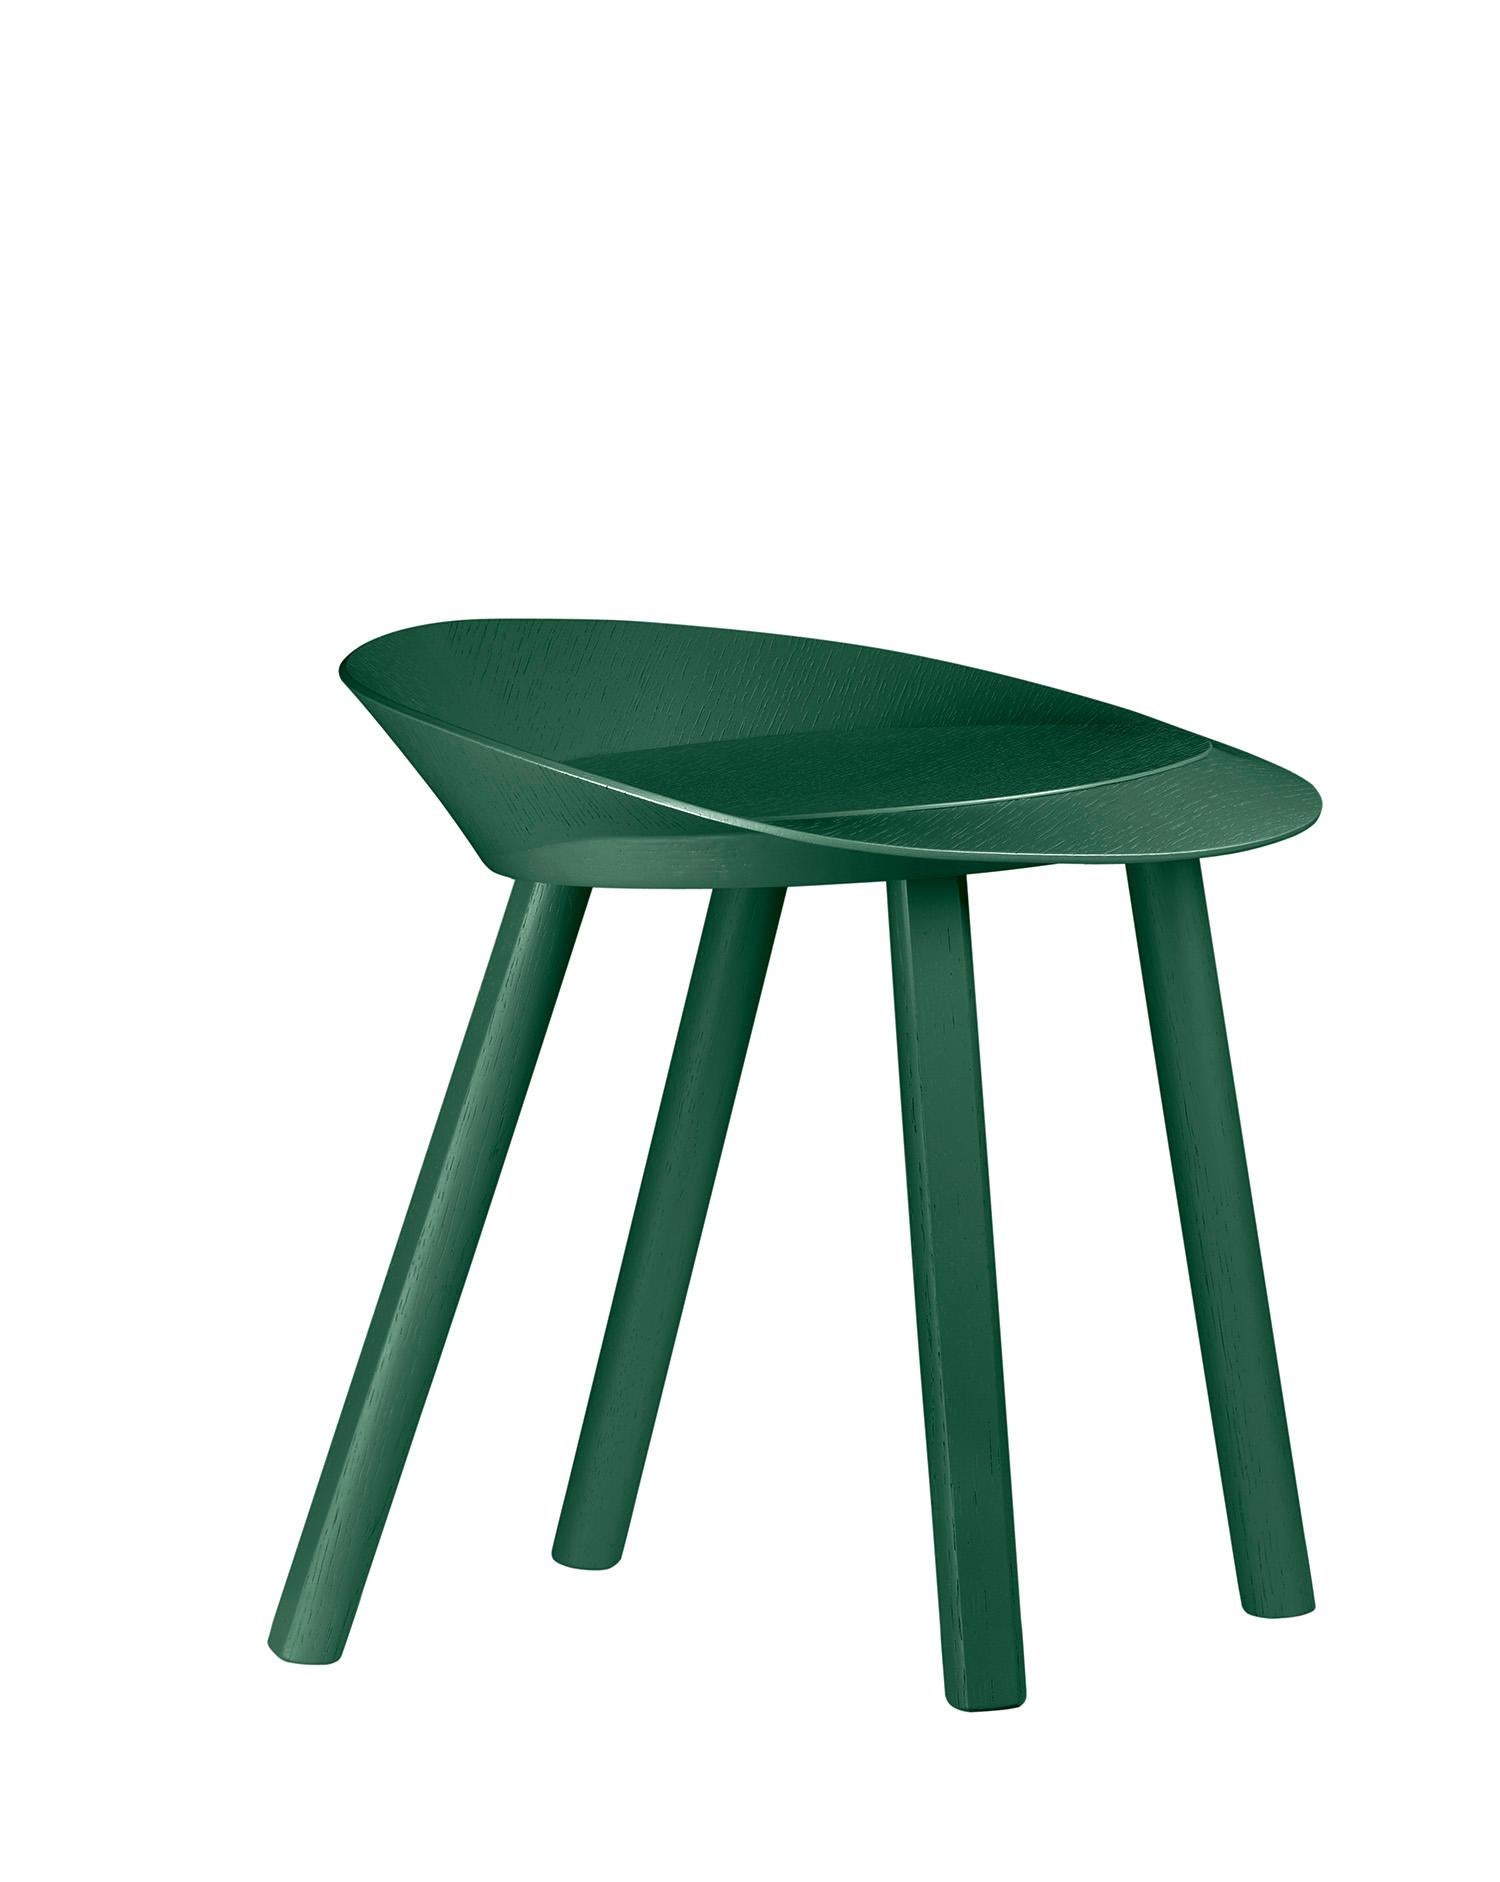 For Sale: Green (Ivy Green Lacquer) e15 Mr. Collins Stool by Stefan Diez